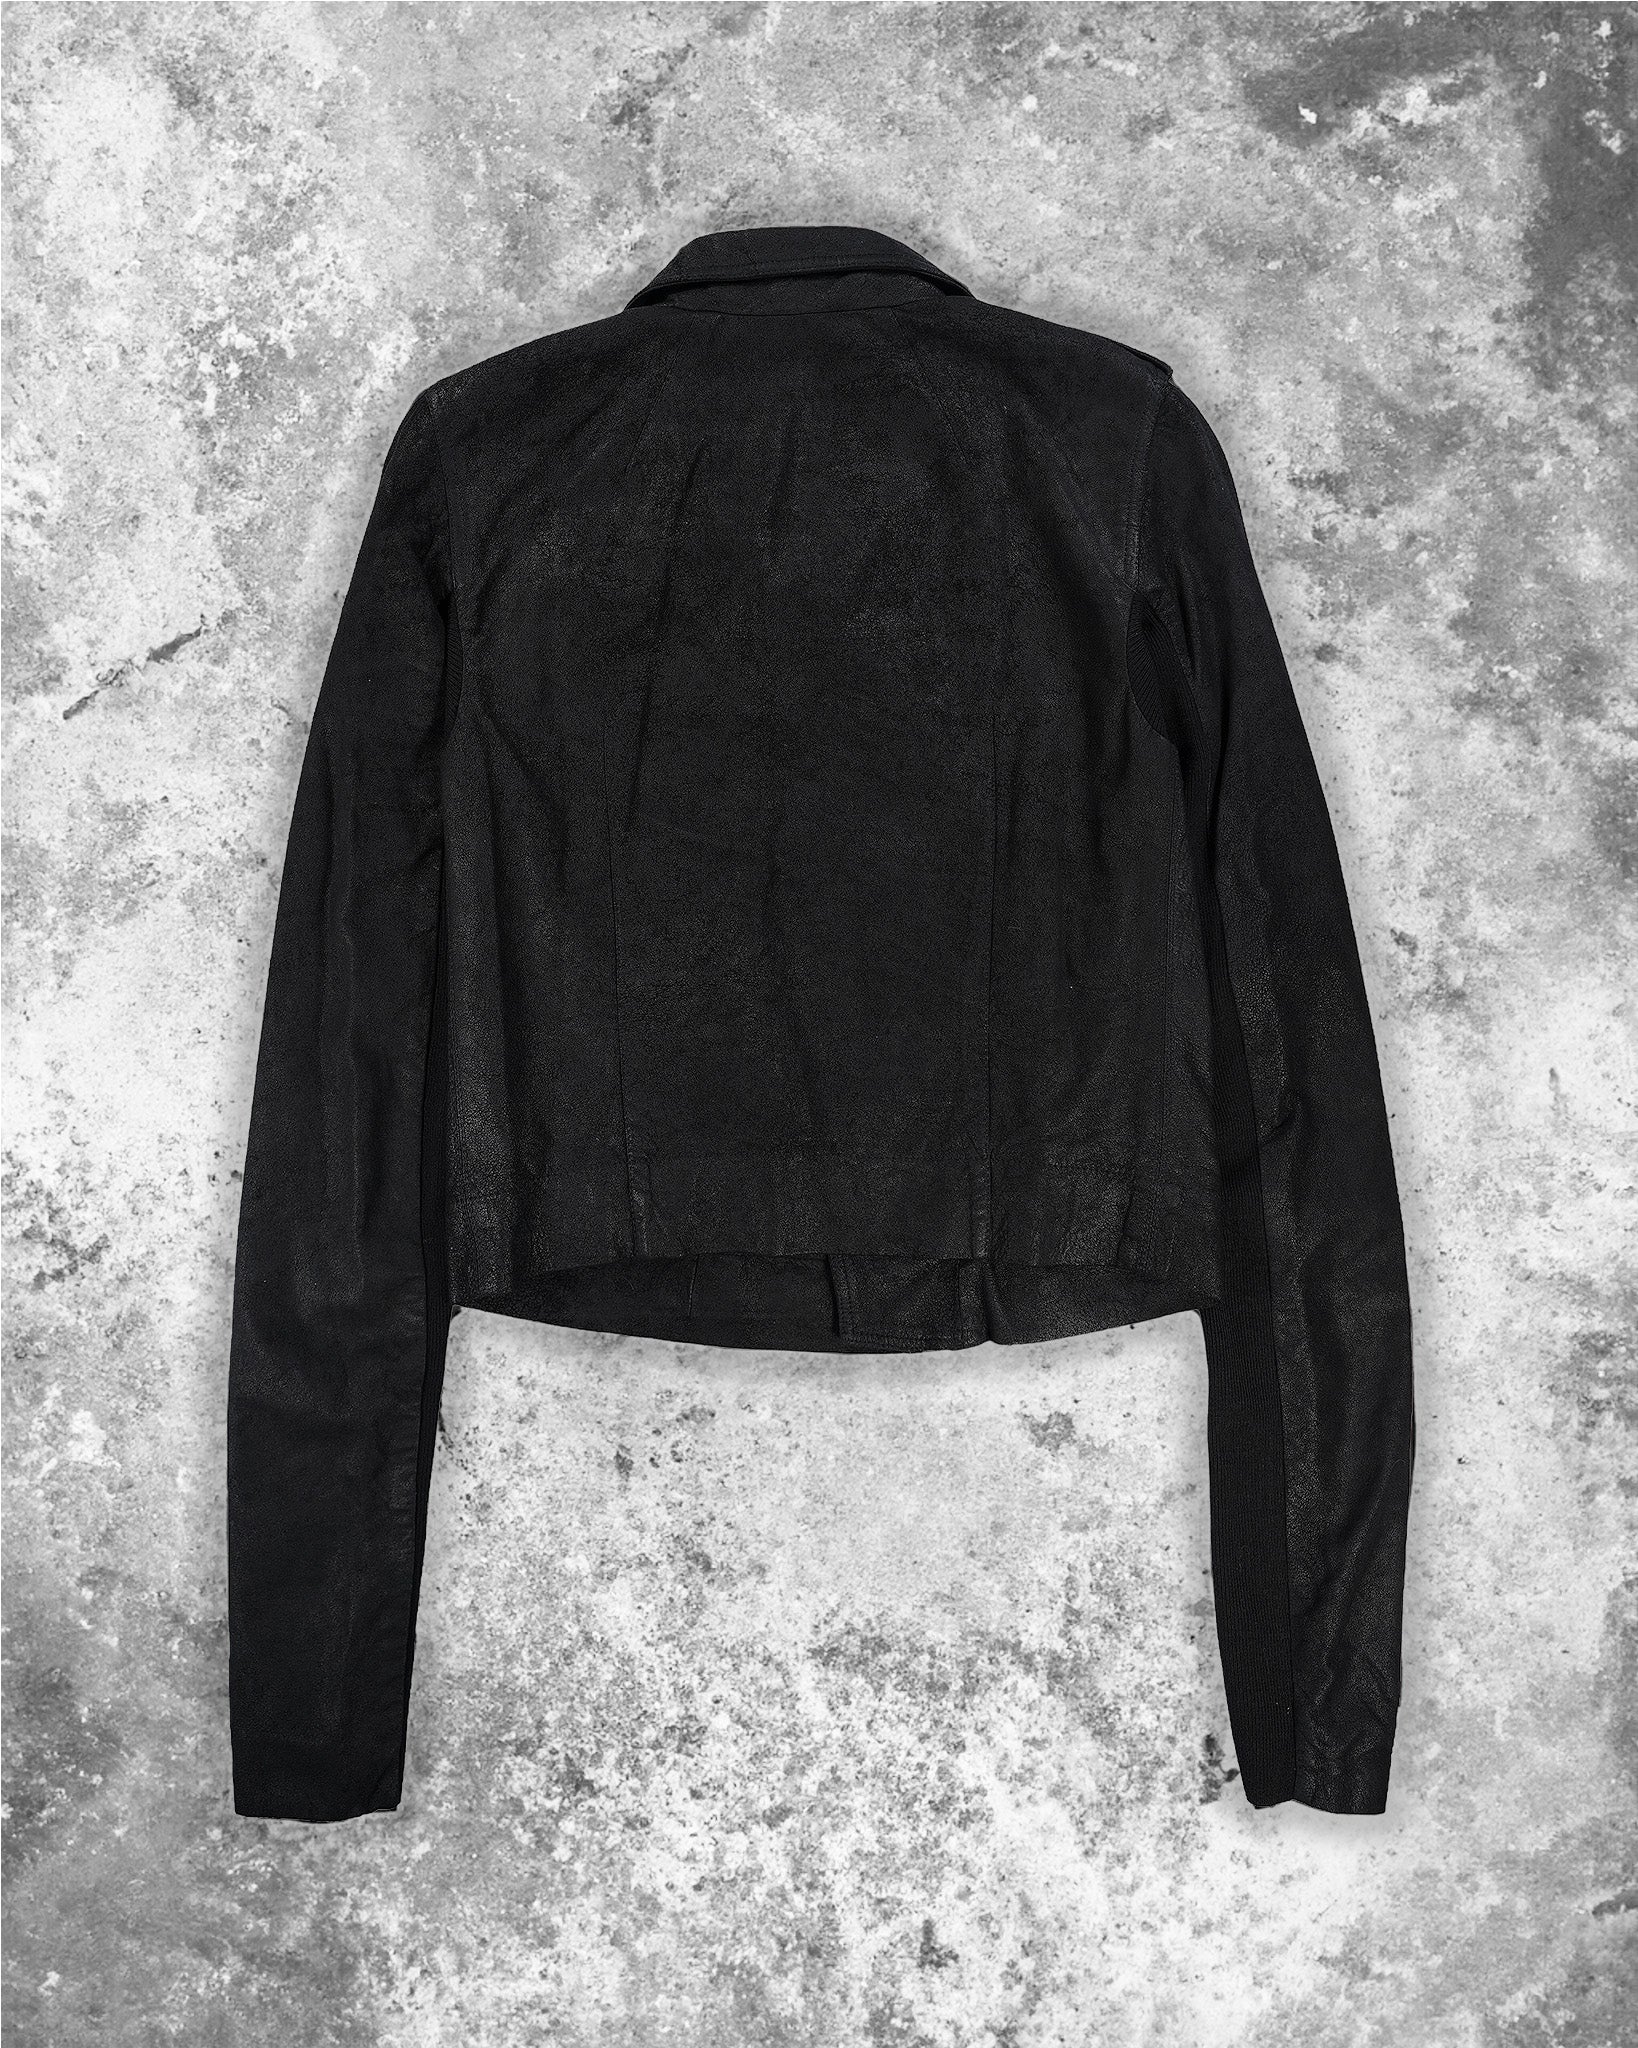 Rick Owens “Blistered” Leather Stooges Jacket - FW14 “Moody”